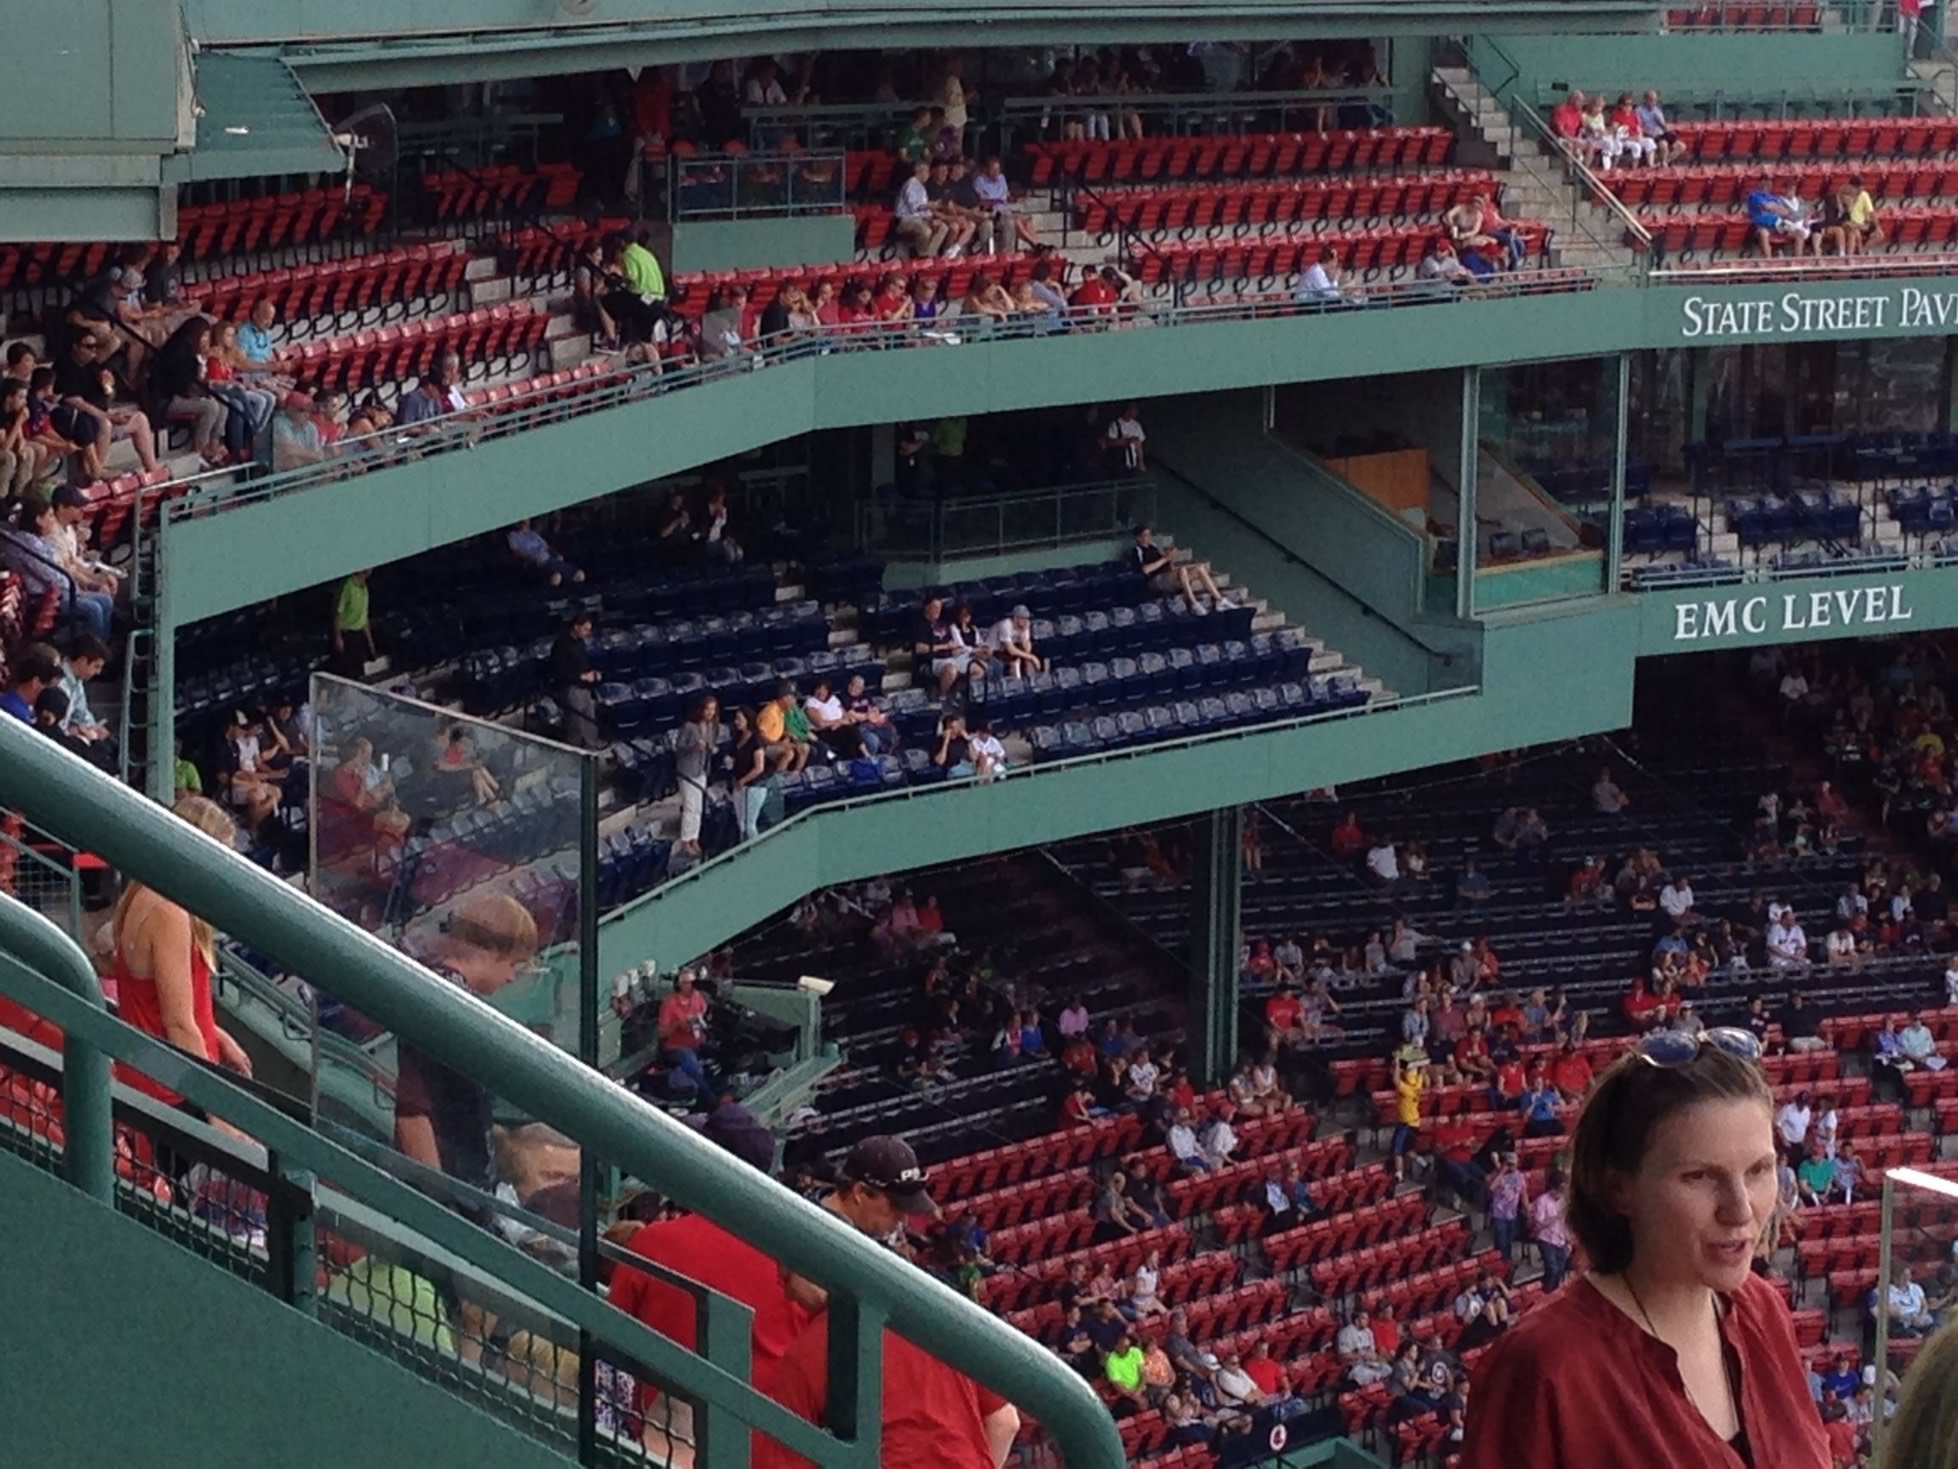 Fenway Park Seating for Red Sox Games - RateYourSeats.com